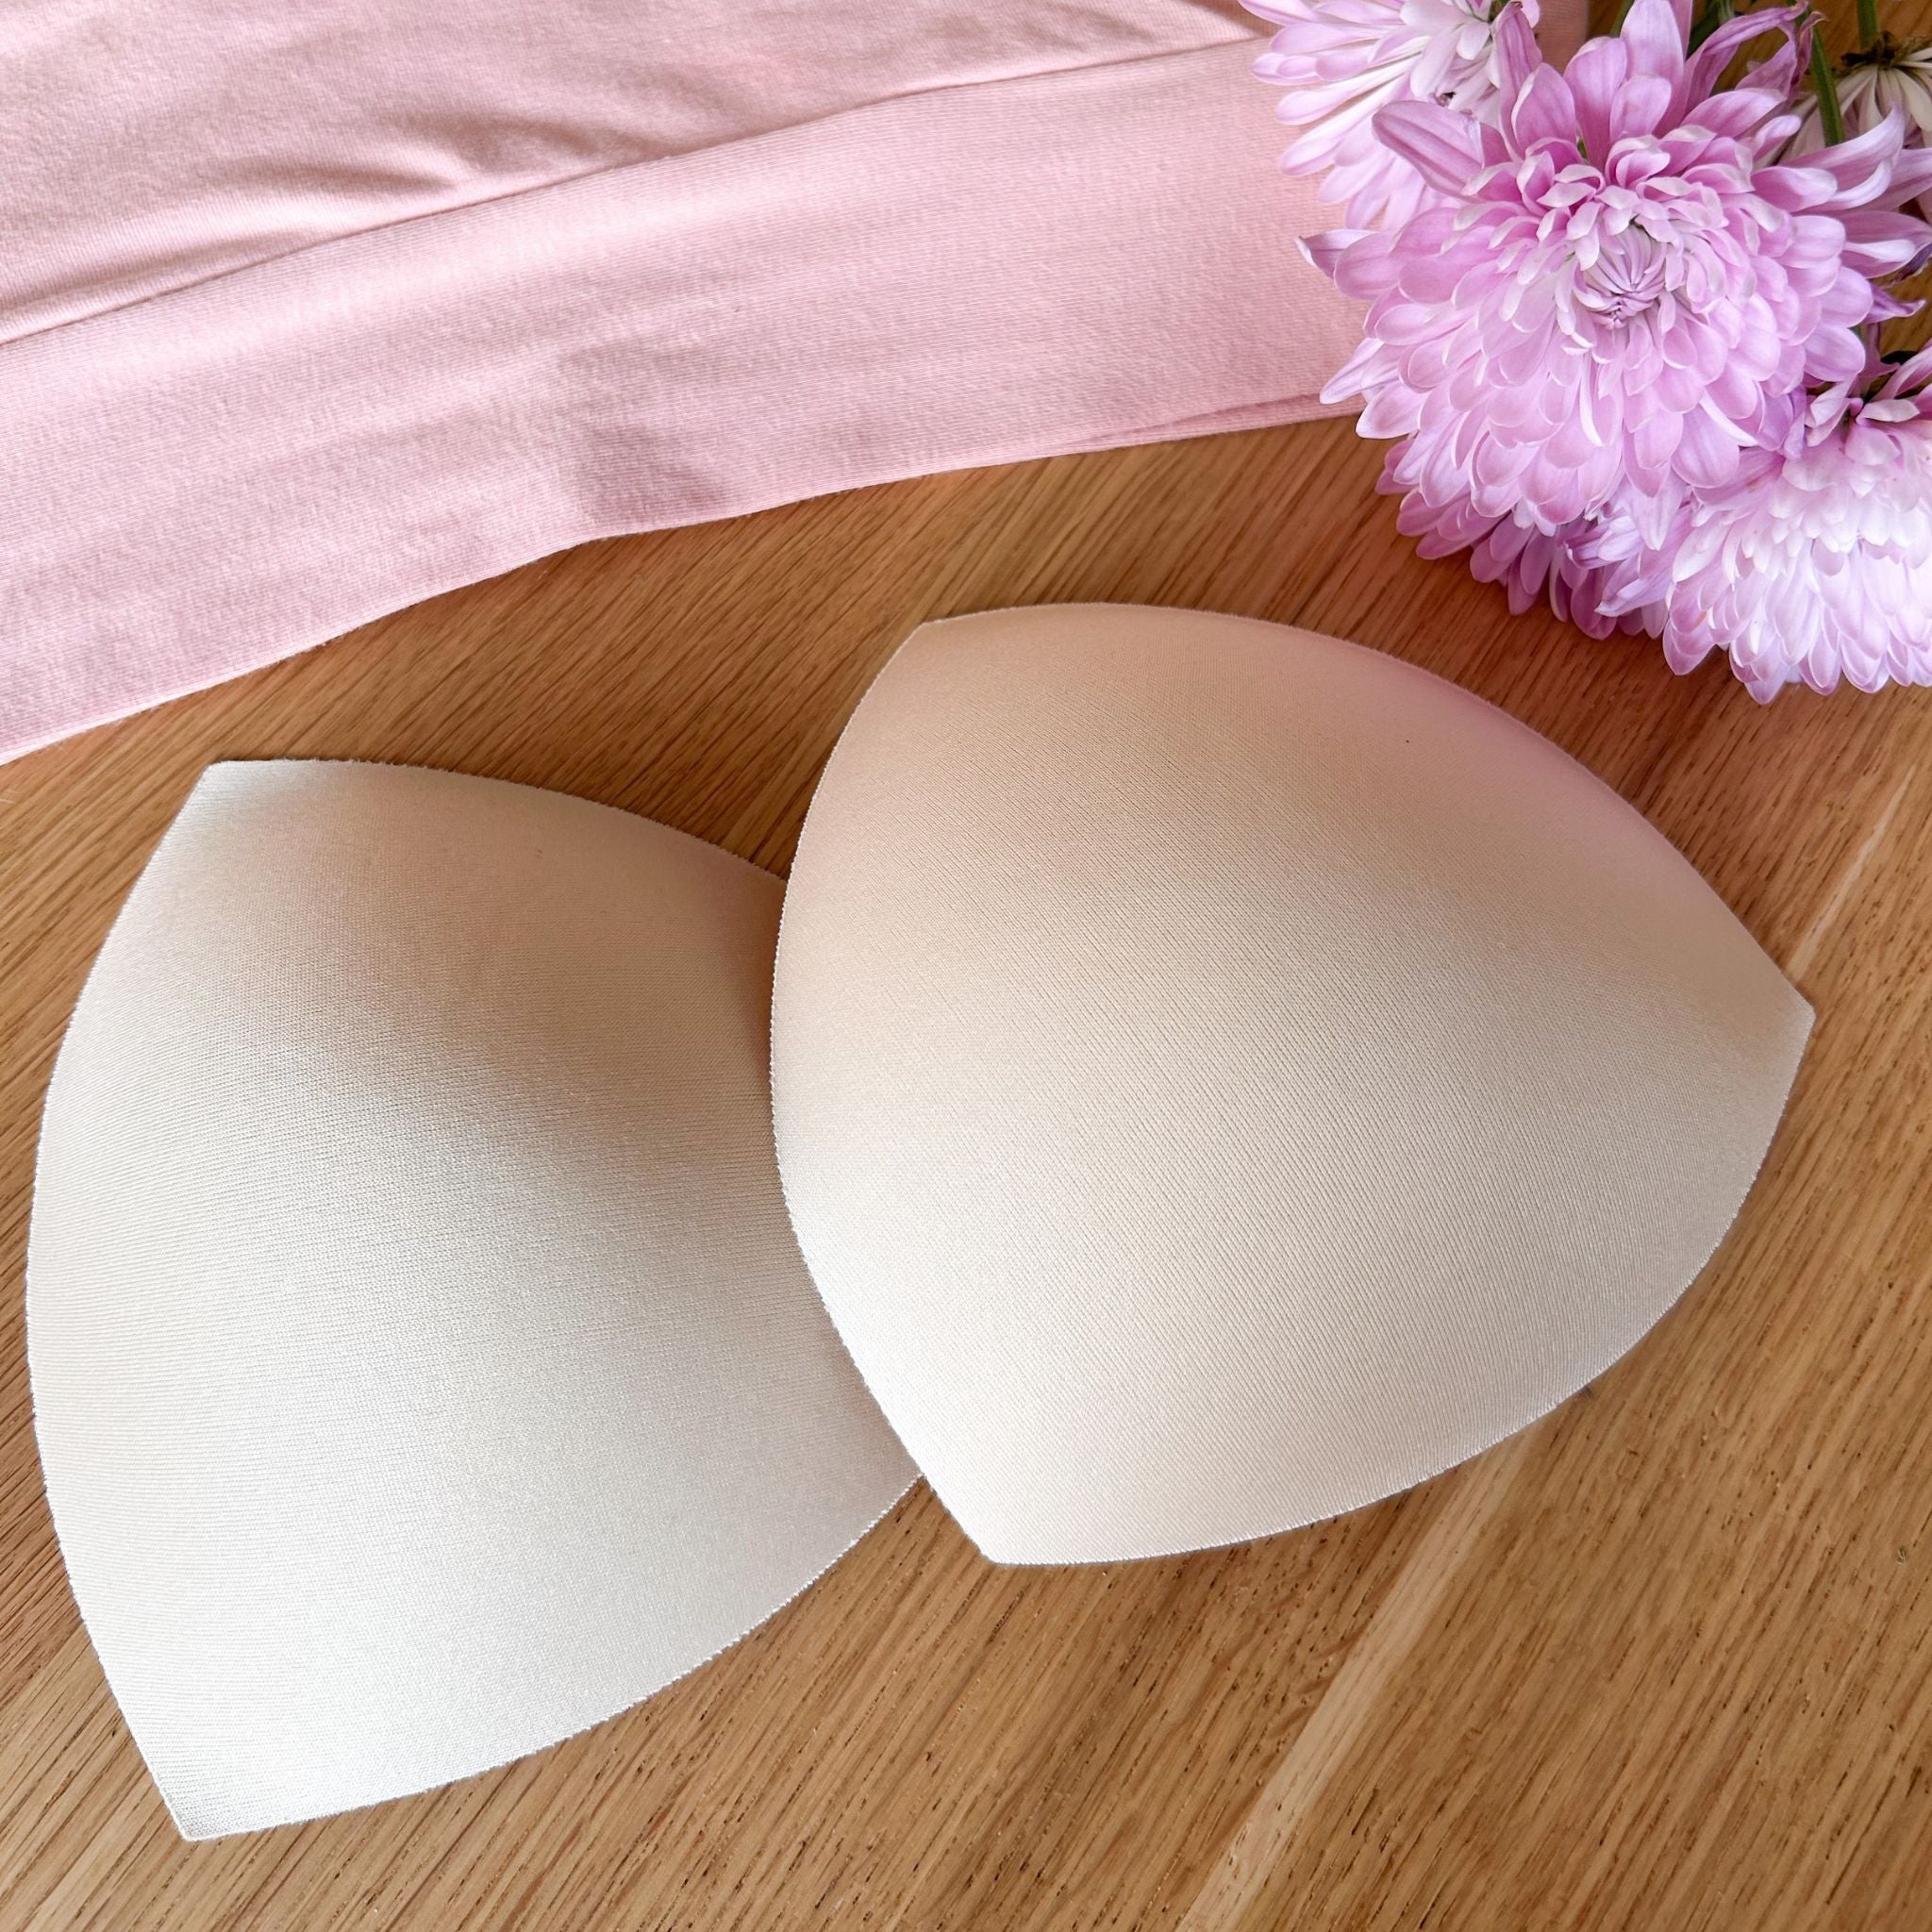 Wholesale nude bra cups for dresses For All Your Intimate Needs 